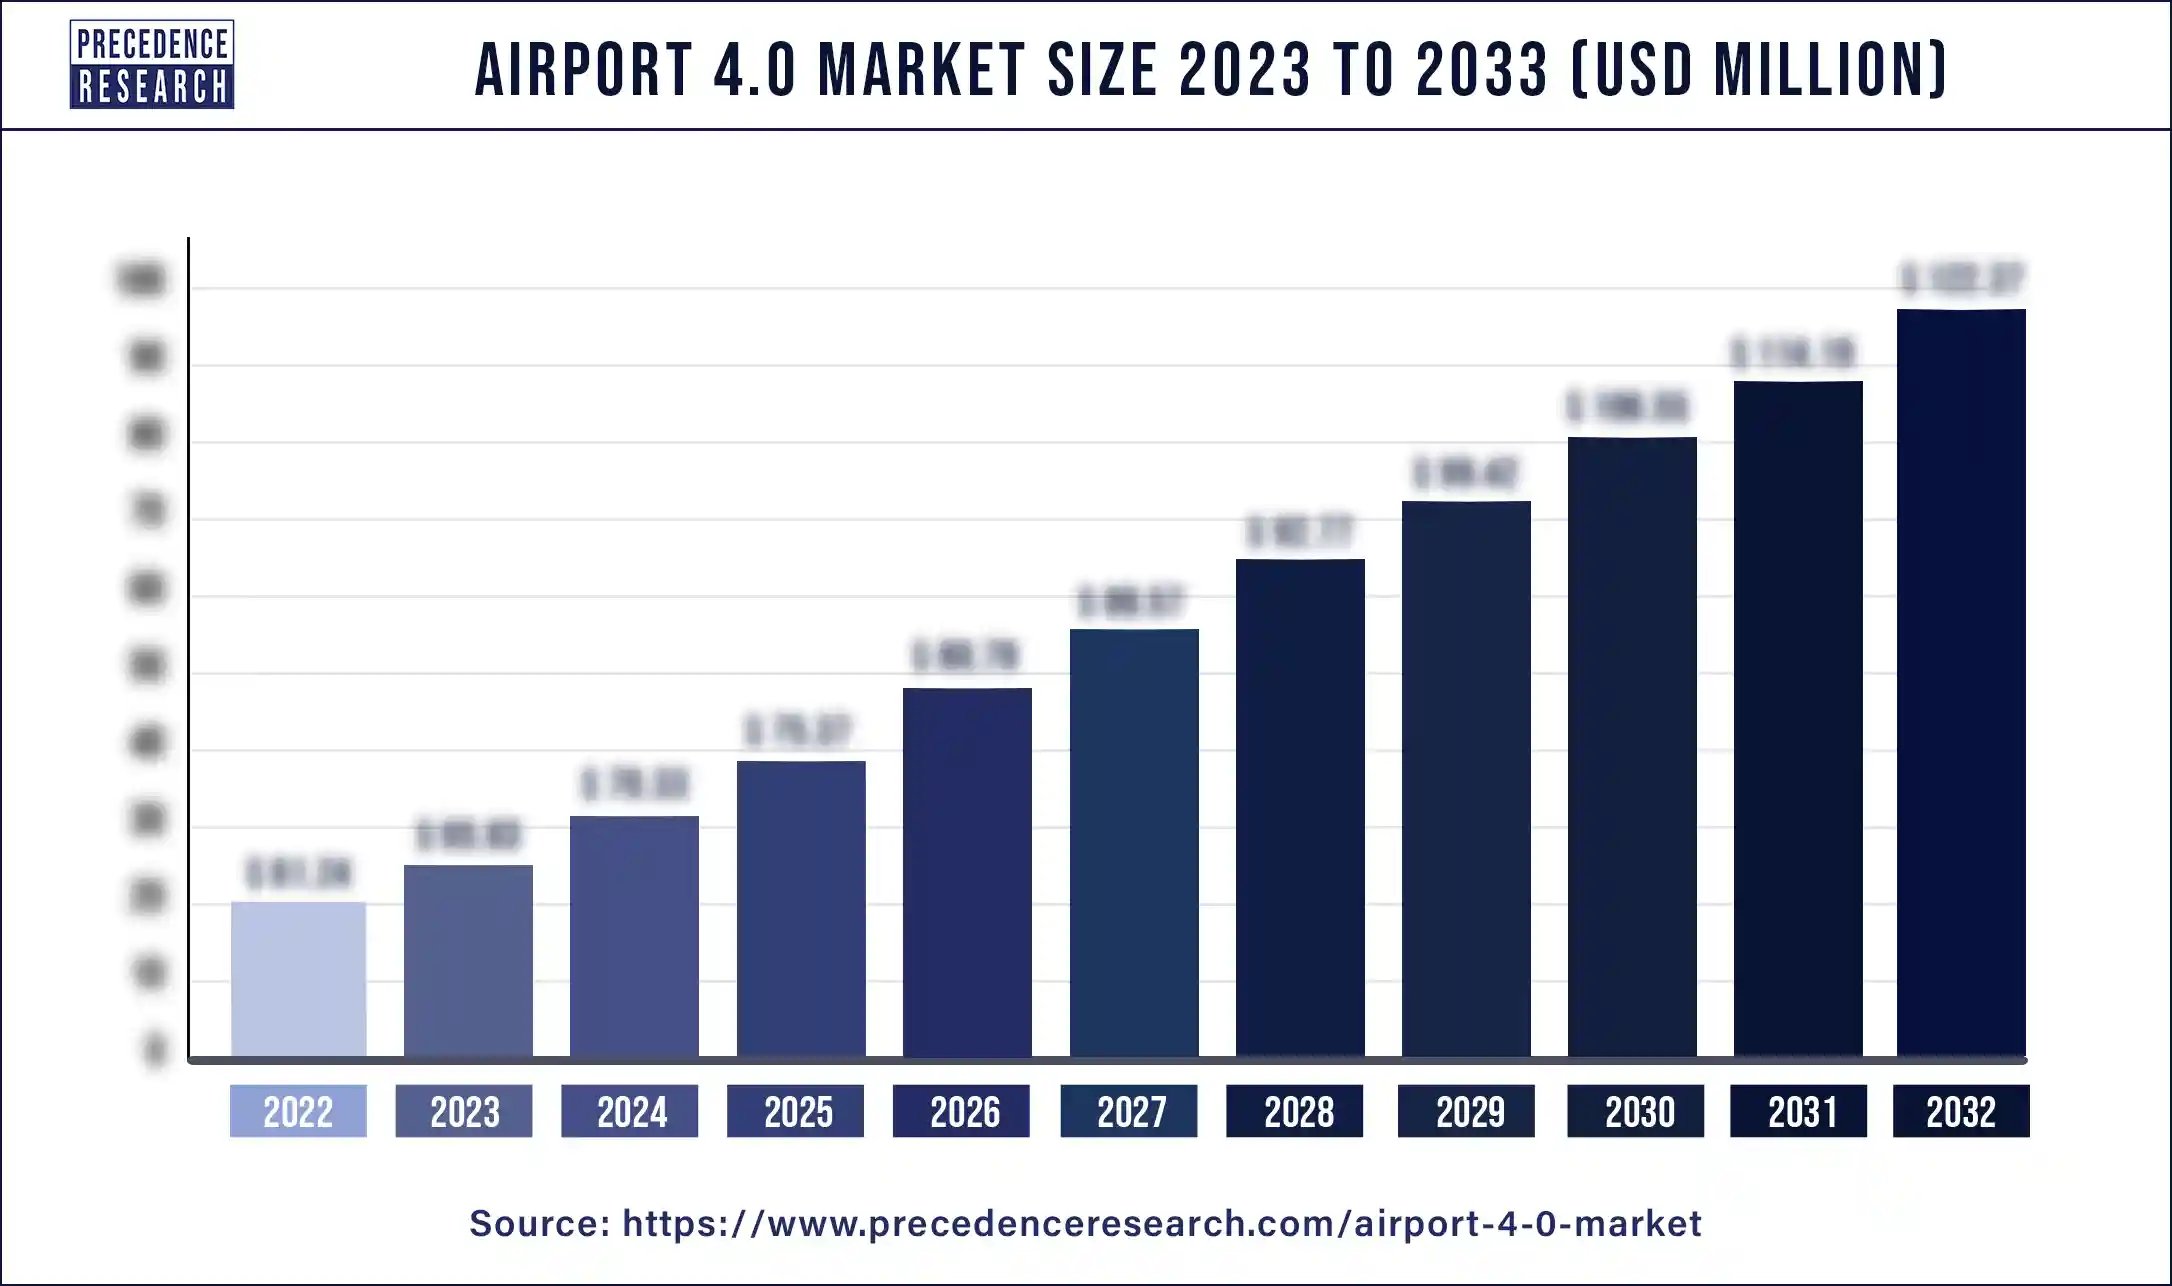 Airport 4.0 Market Size 2024 to 2033